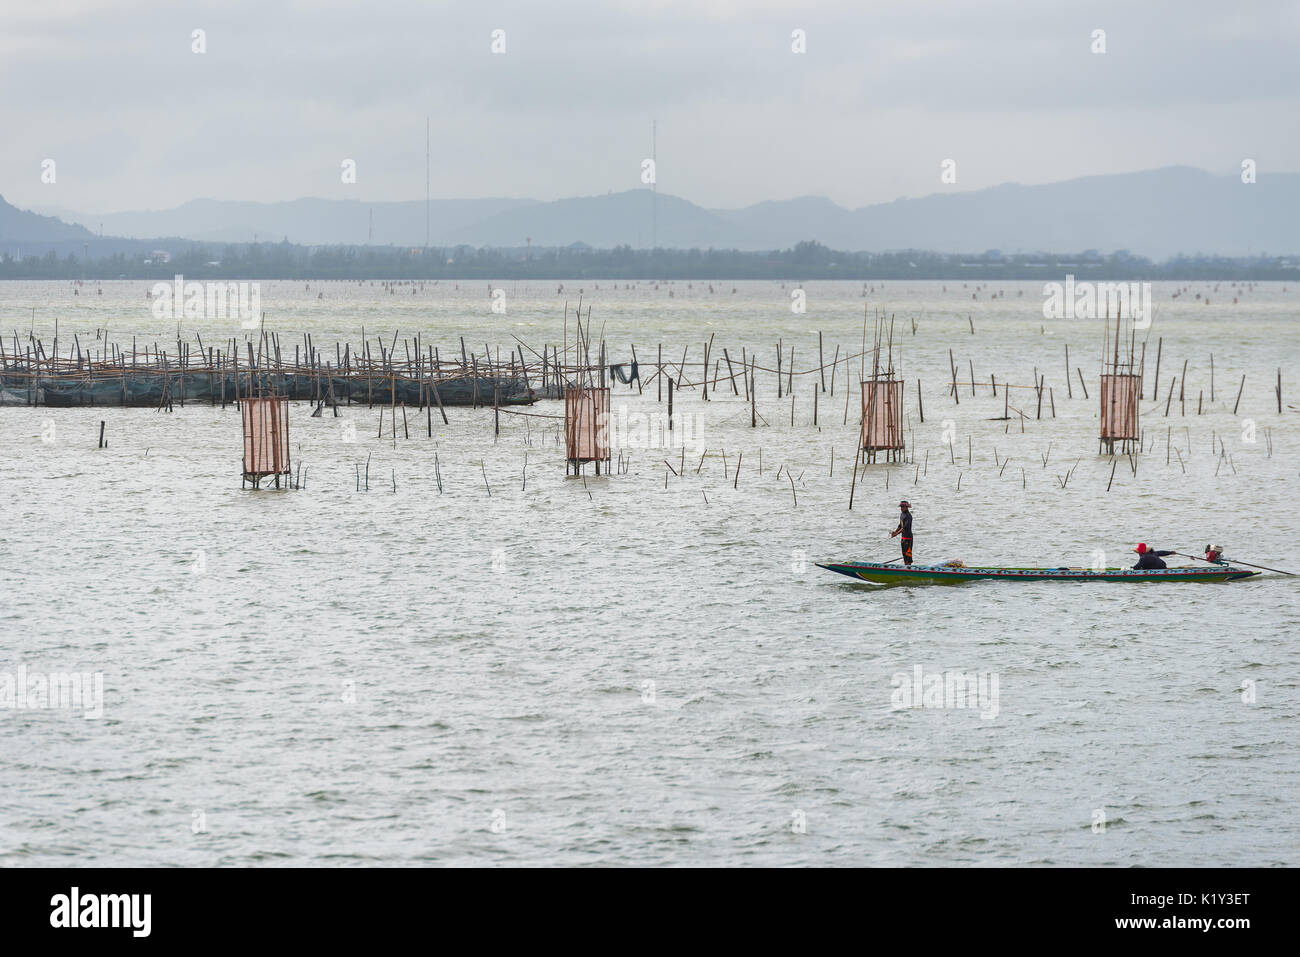 SONGKHLA THAILAND - FEBRUARY 18: Two fishermen in boat that surrounded by fish traps by local knowledge at Songkhla Lake on February 18, 2017 in Songk Stock Photo